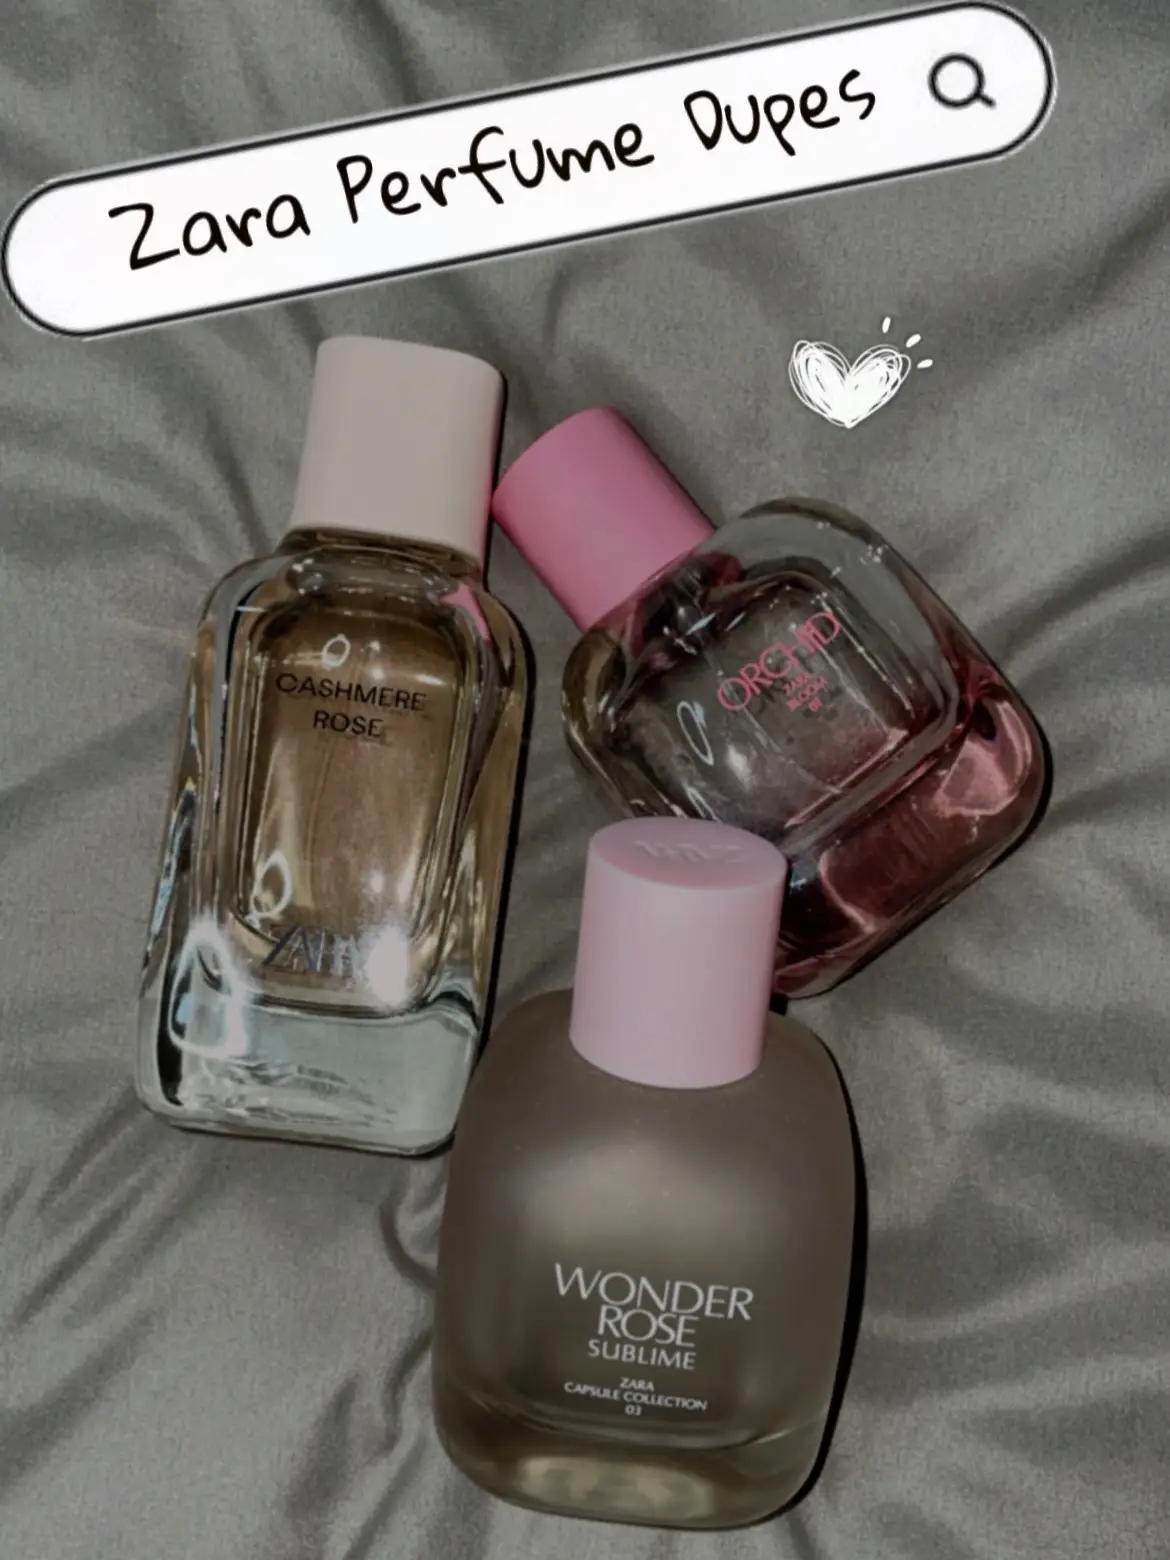 ZARA dupe perfume, Gallery posted by Deanna